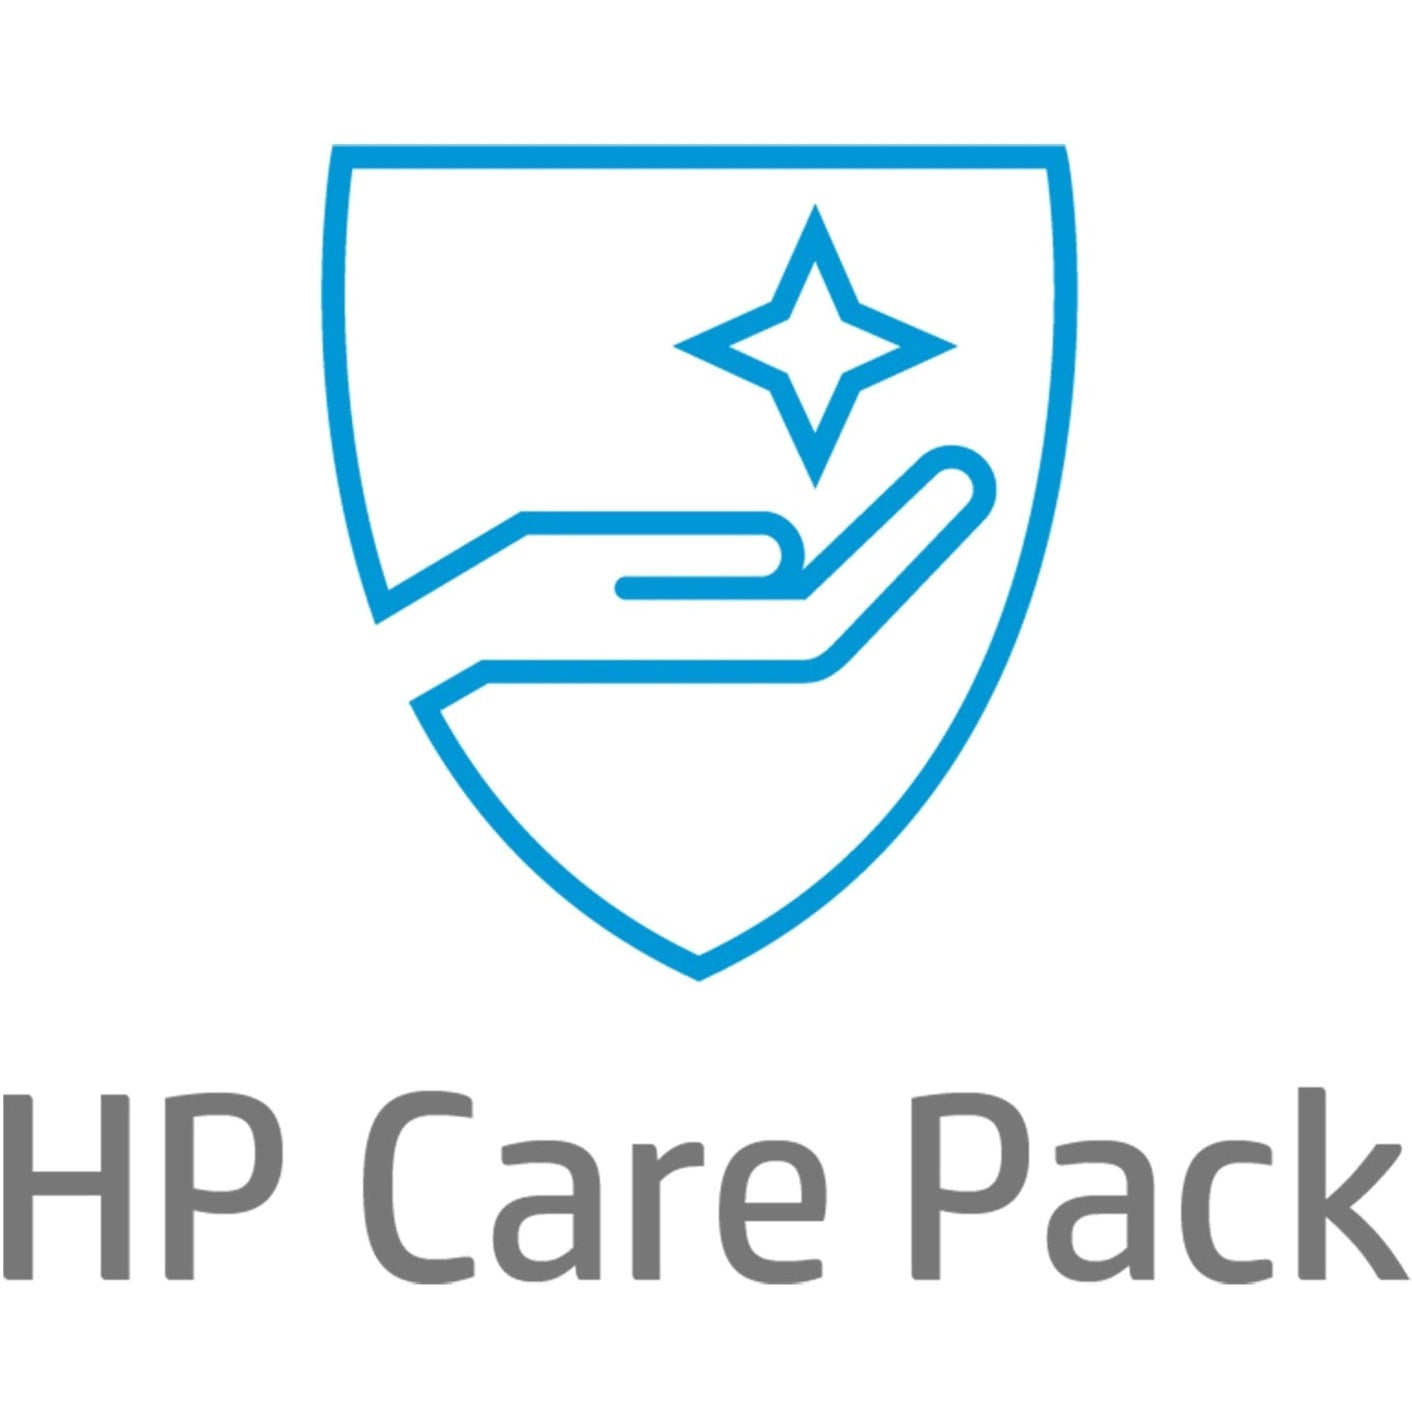 HP Care Pack Global Hardware Support - Extended Warranty - 1 Year - Warranty (UB0F6PE)